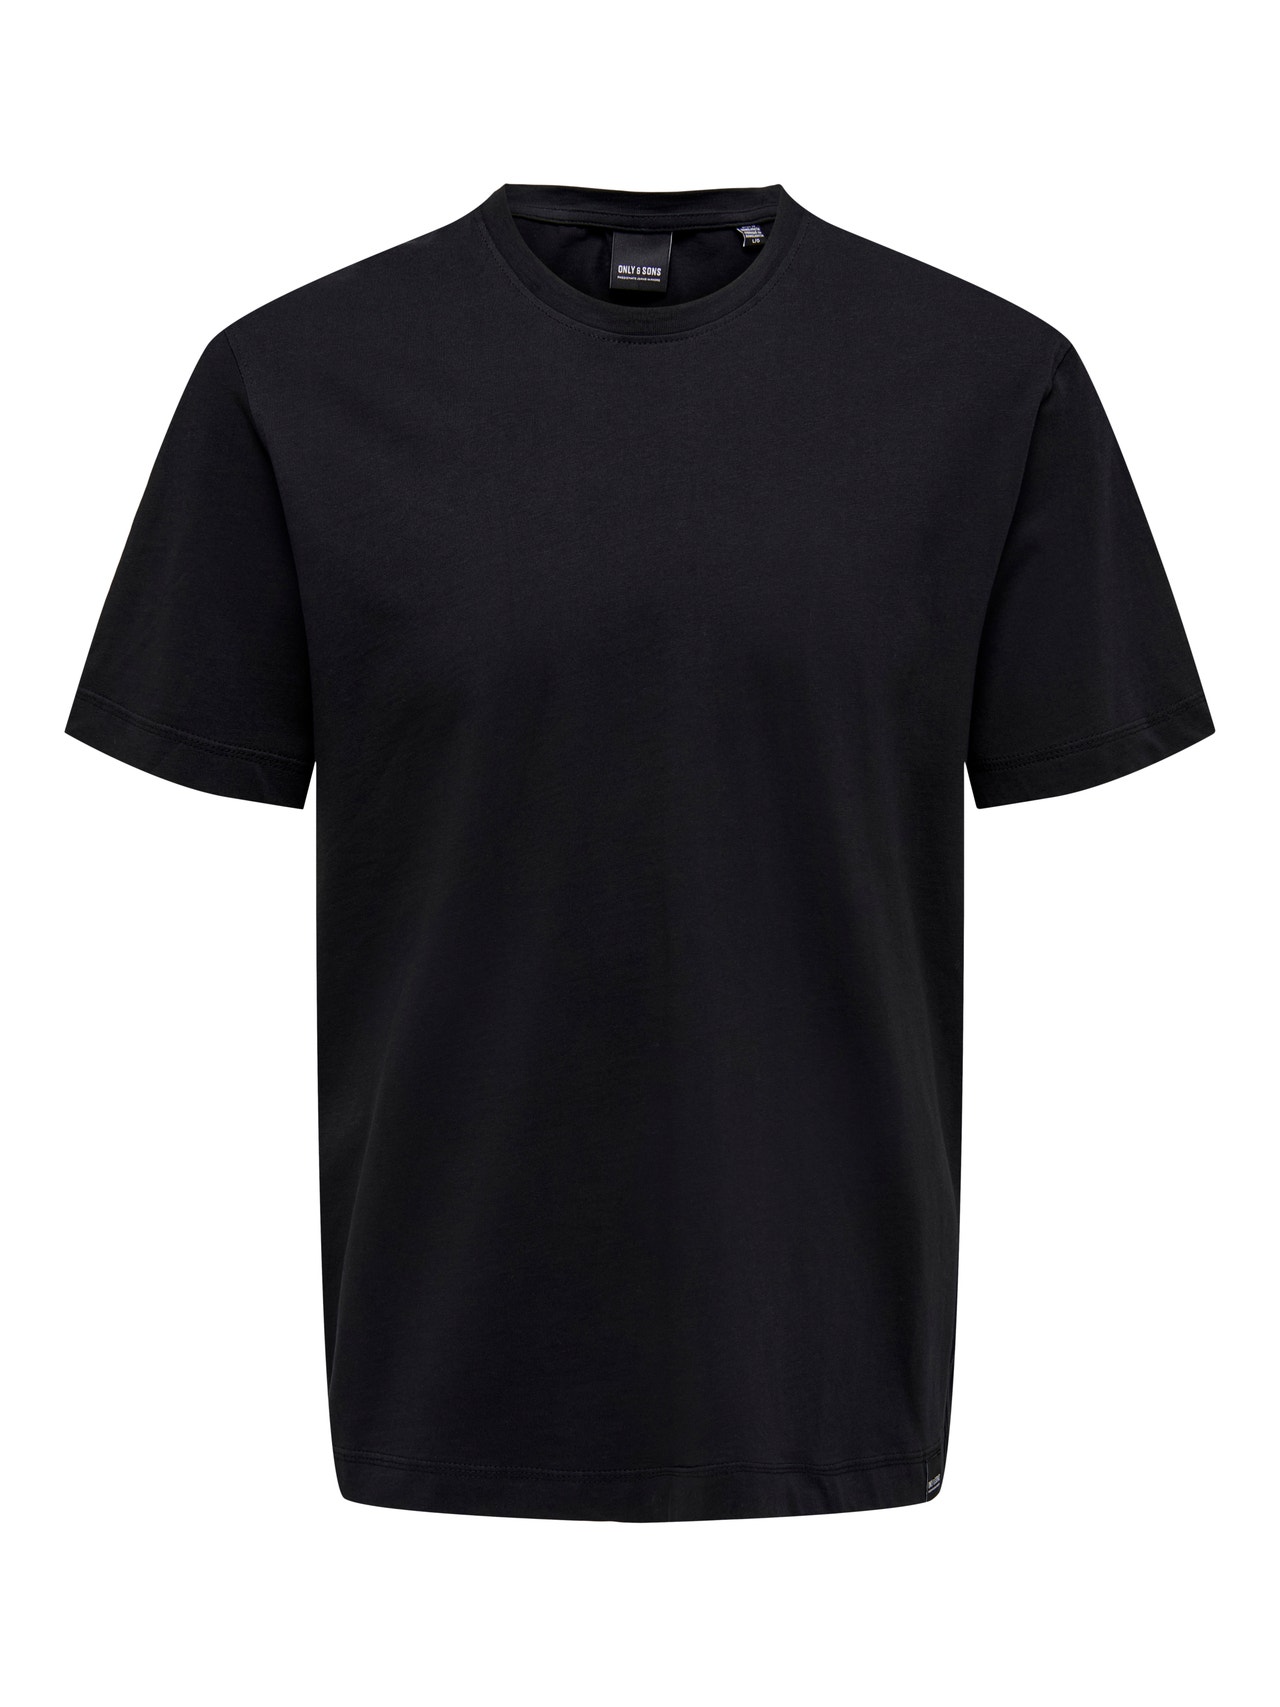 ONLY & SONS Regular Fit Round Neck T-Shirt -Black - 22025208